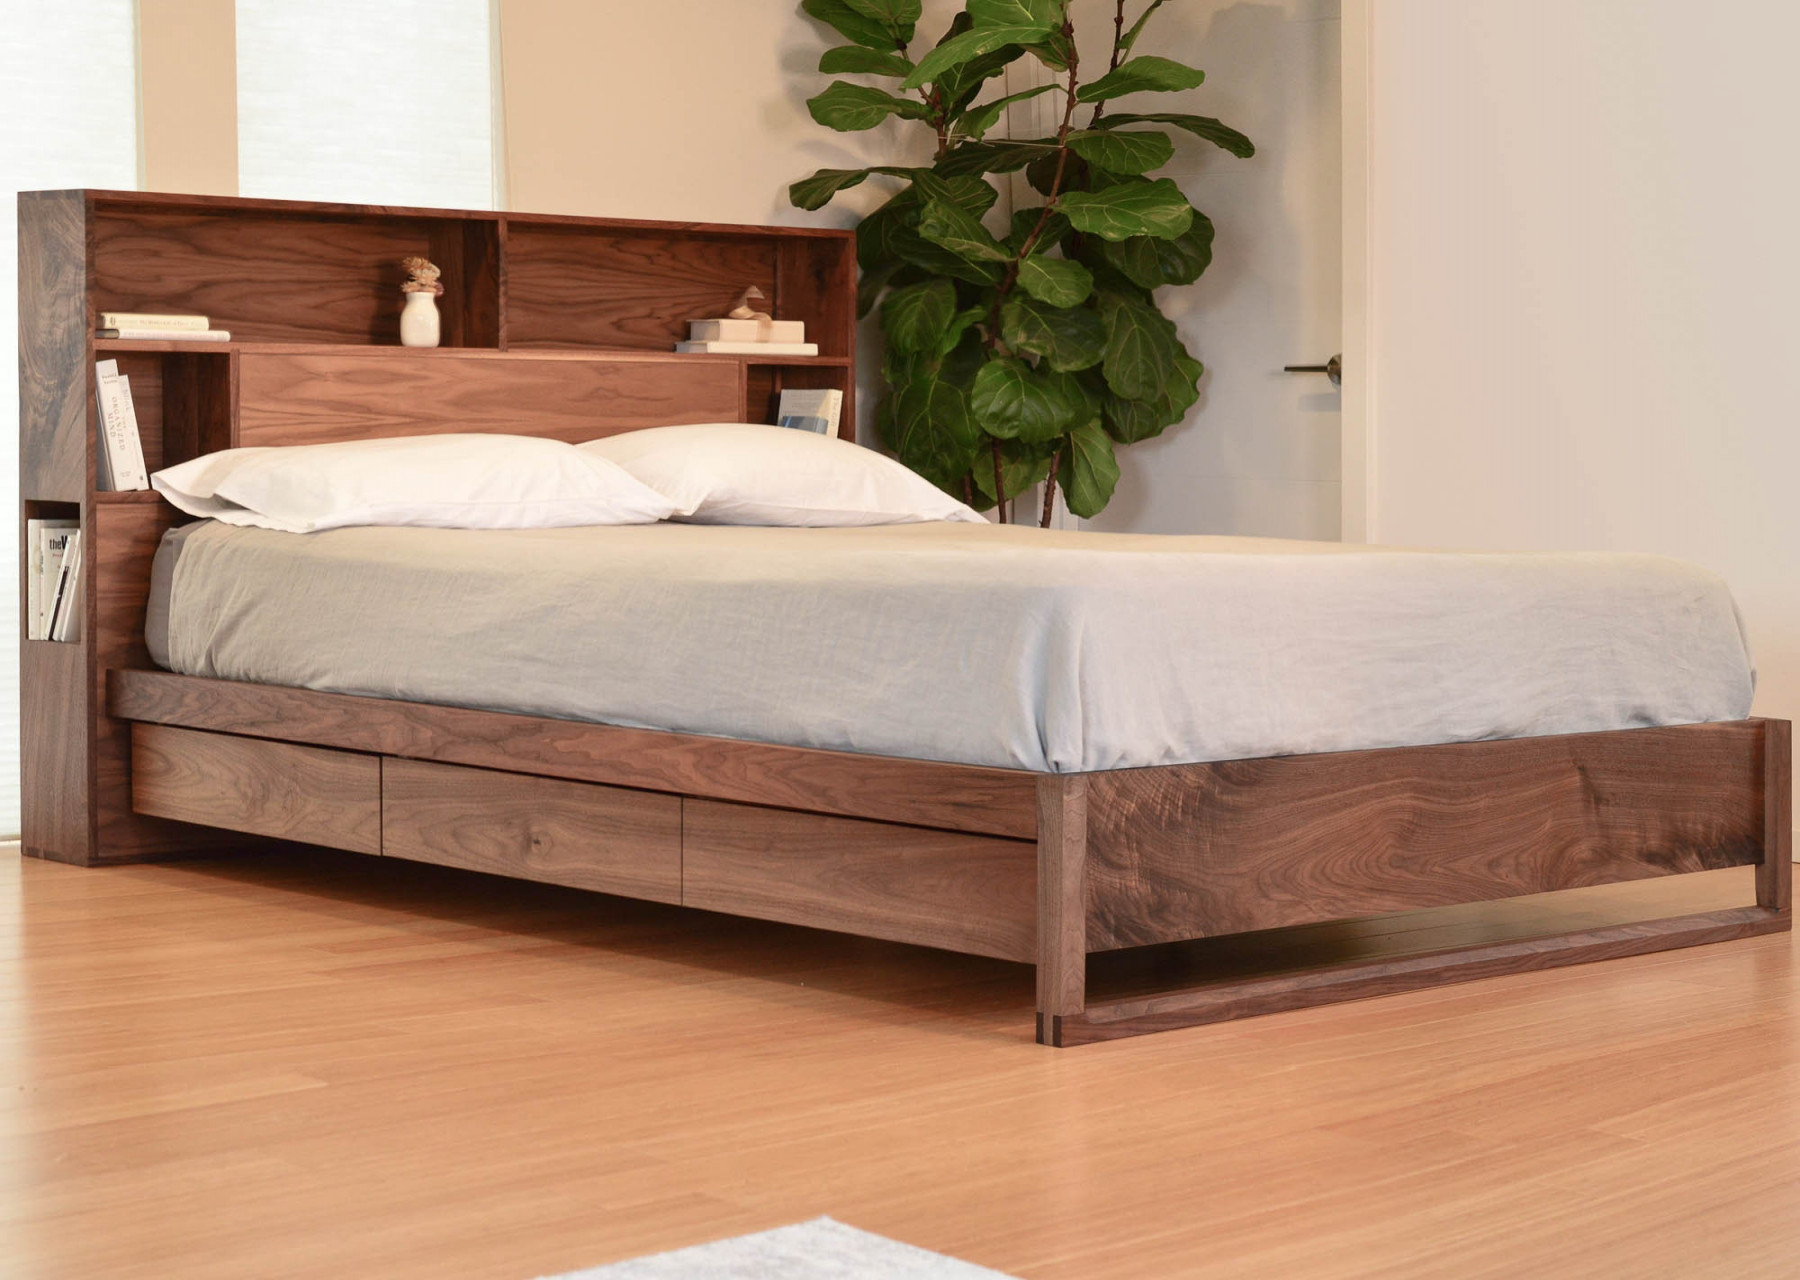 King Bed Frame With Storage